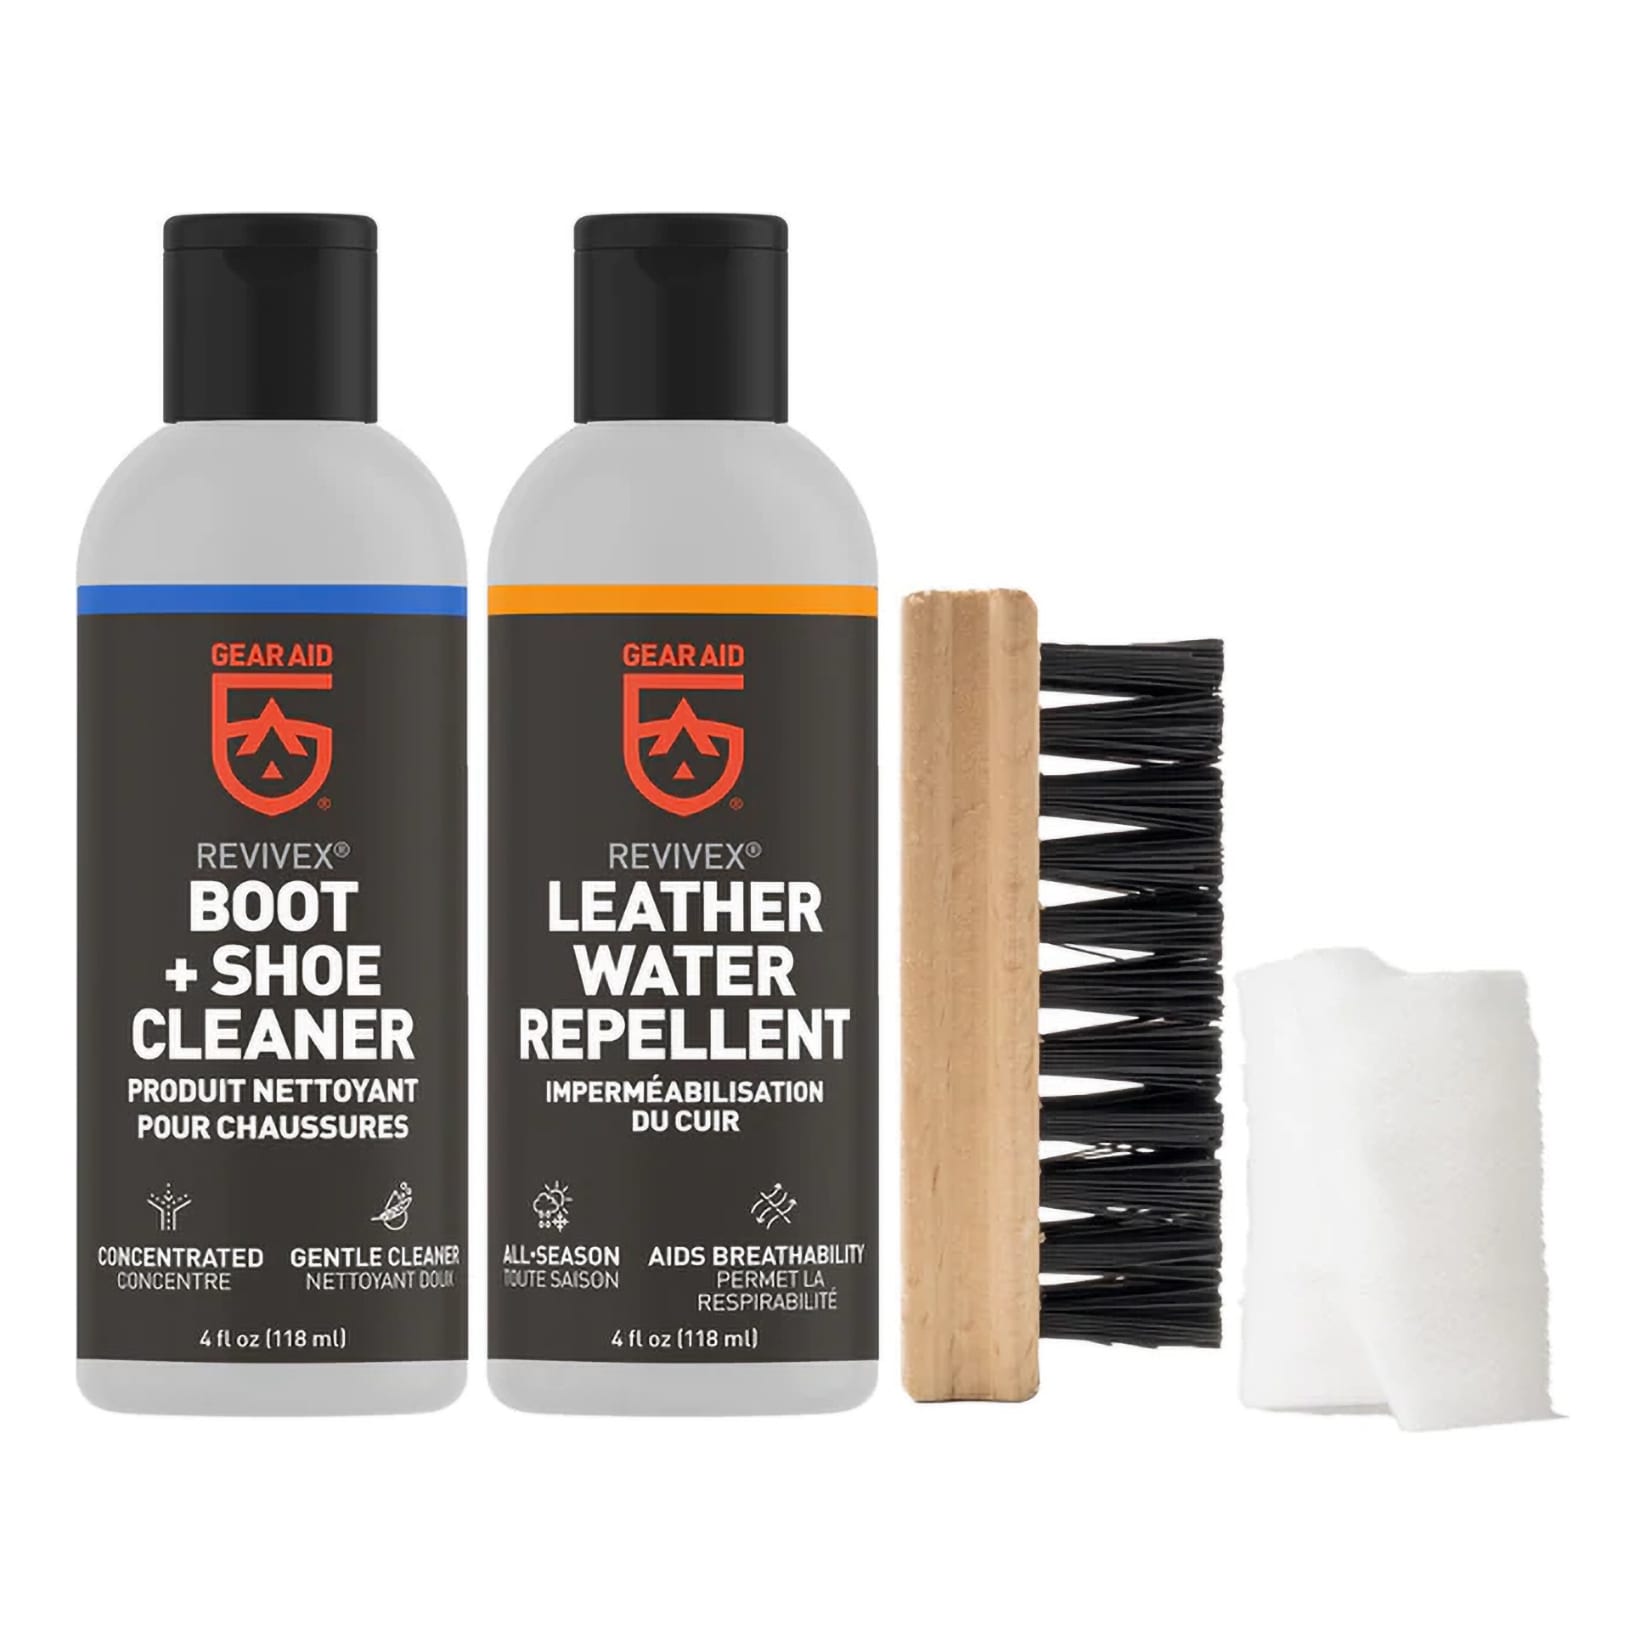 Gear Aid Outerwear Kit with Revivex Pro Cleaner and Revivex Durable Water Repellent Spray, 16.9 fl oz